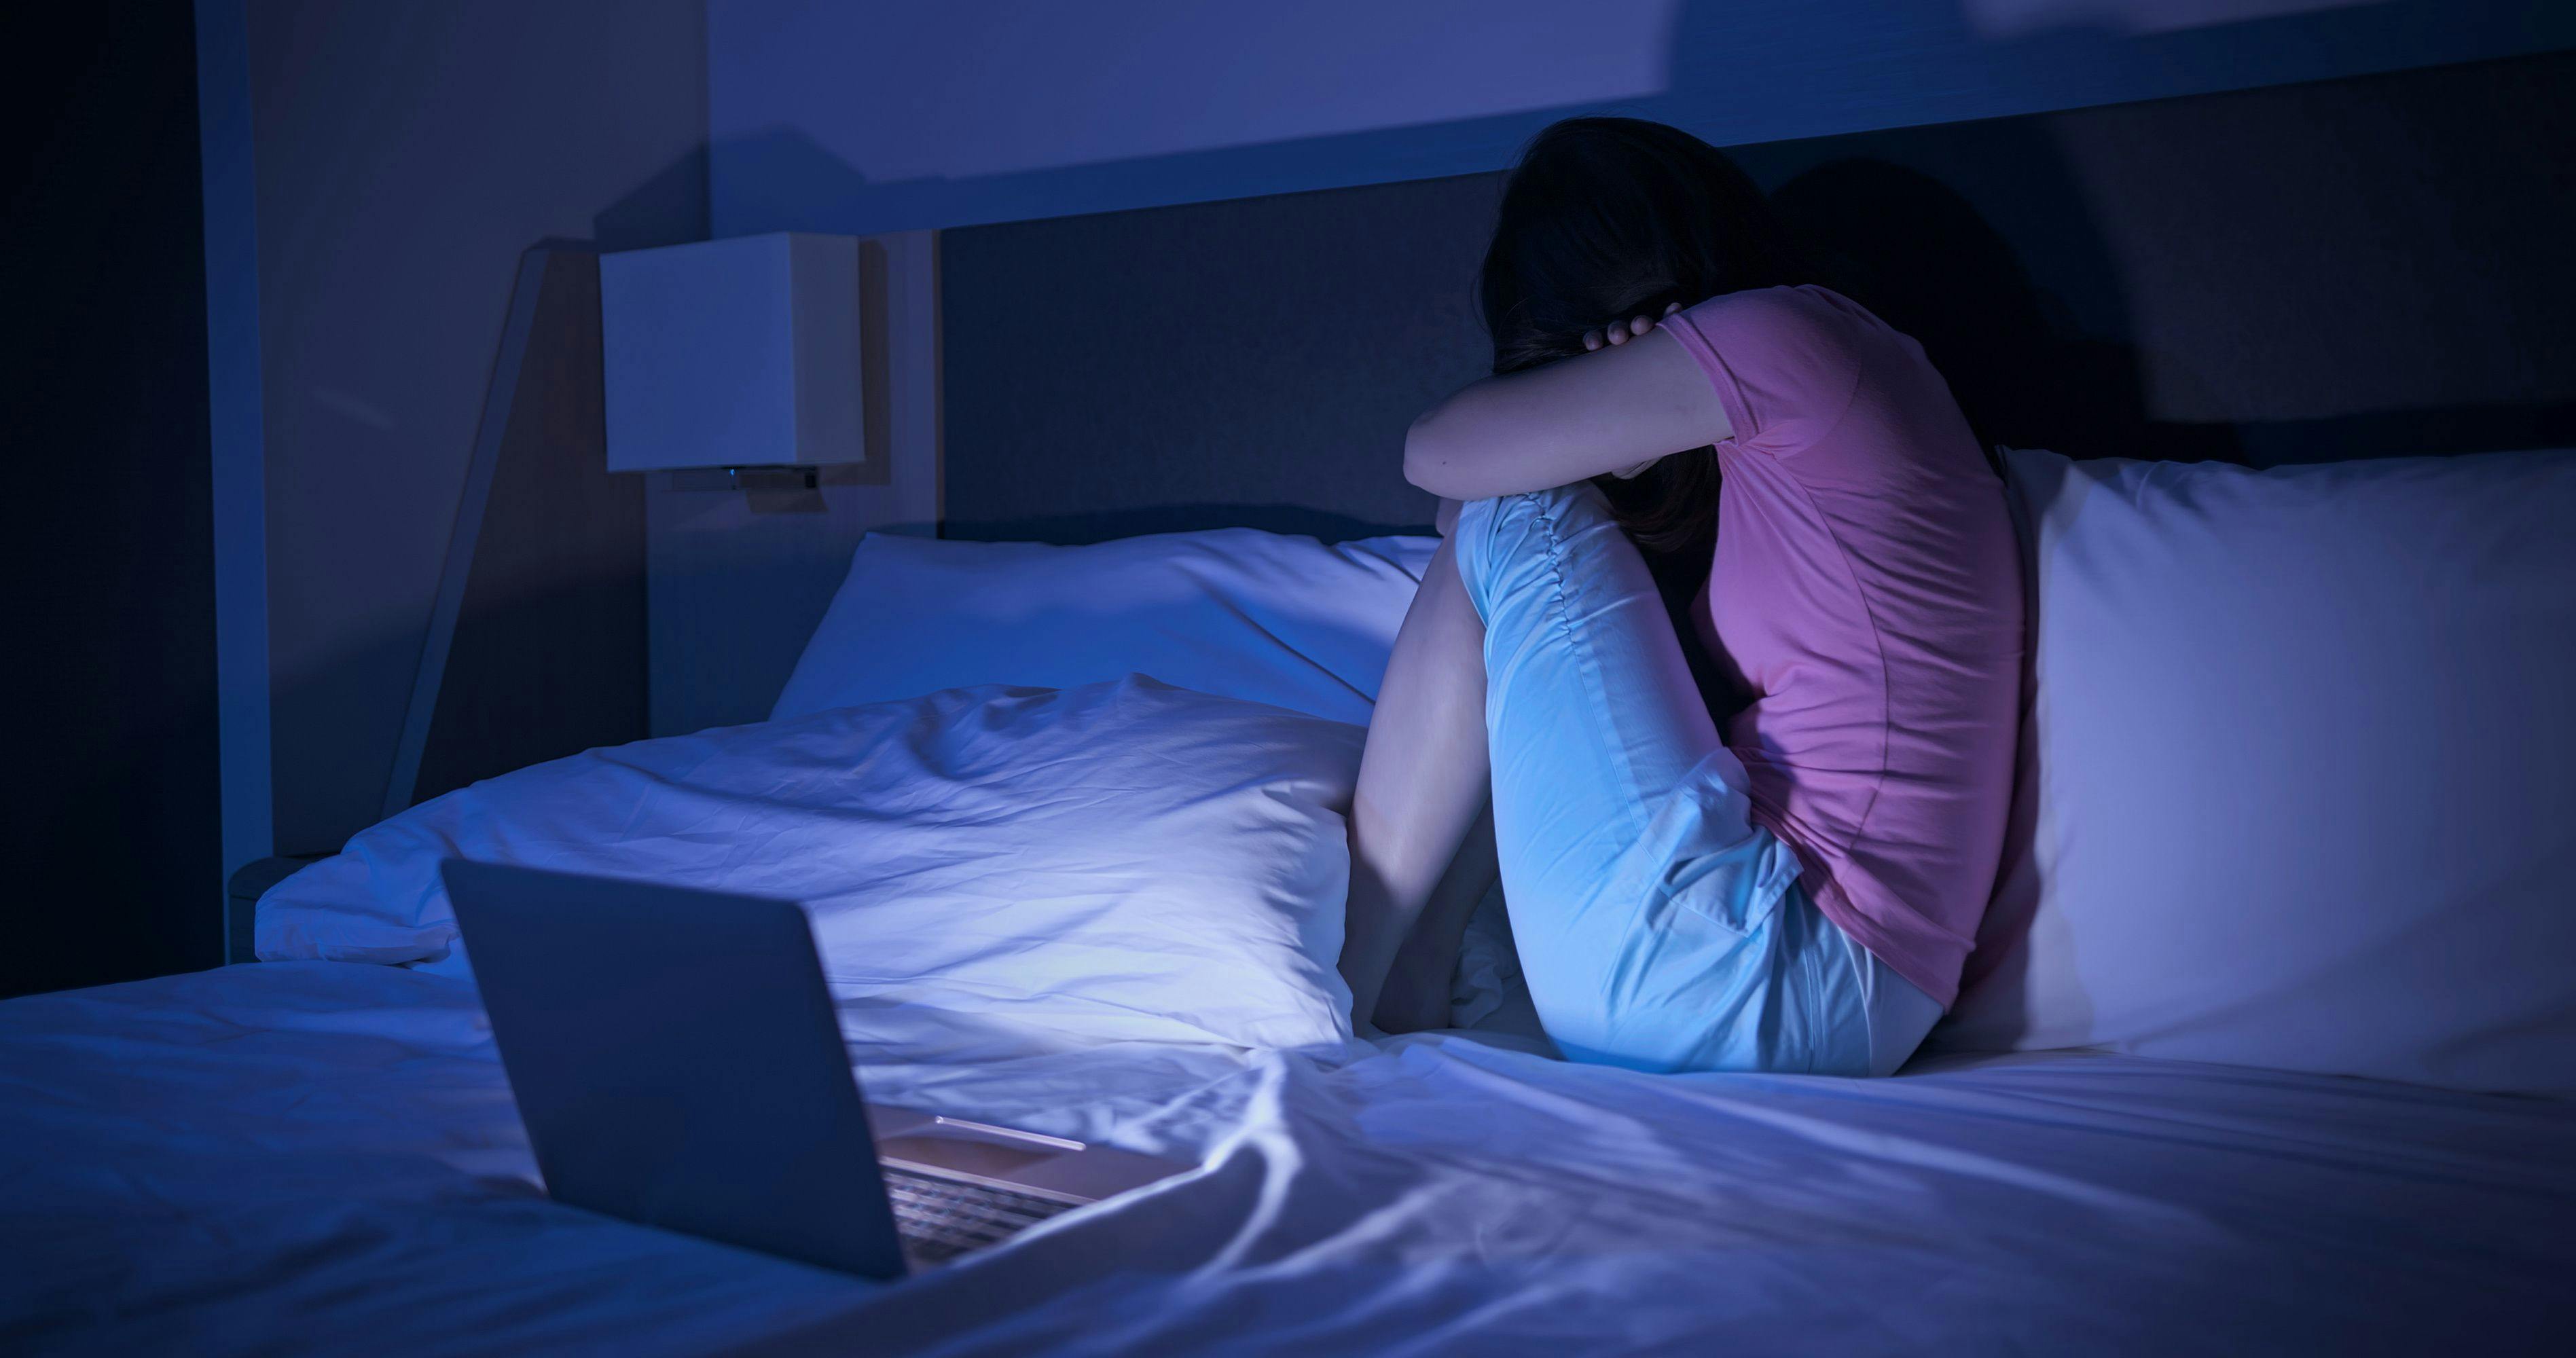 Cyberbullying tied to suicidal thoughts among kids, study finds